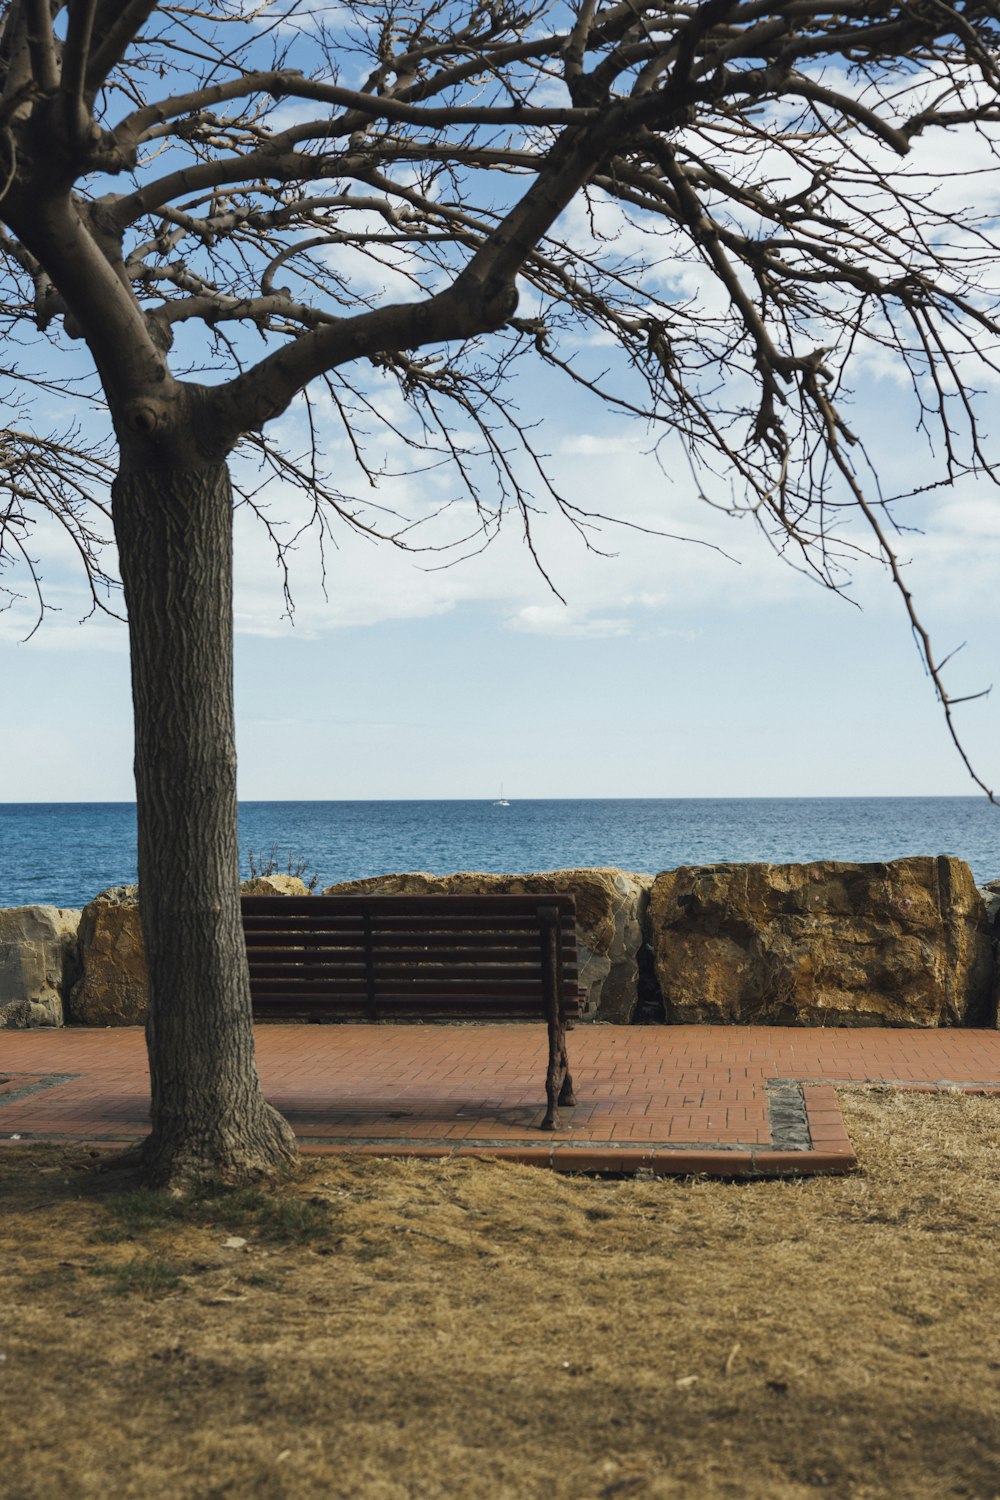 a bench sitting next to a tree near the ocean